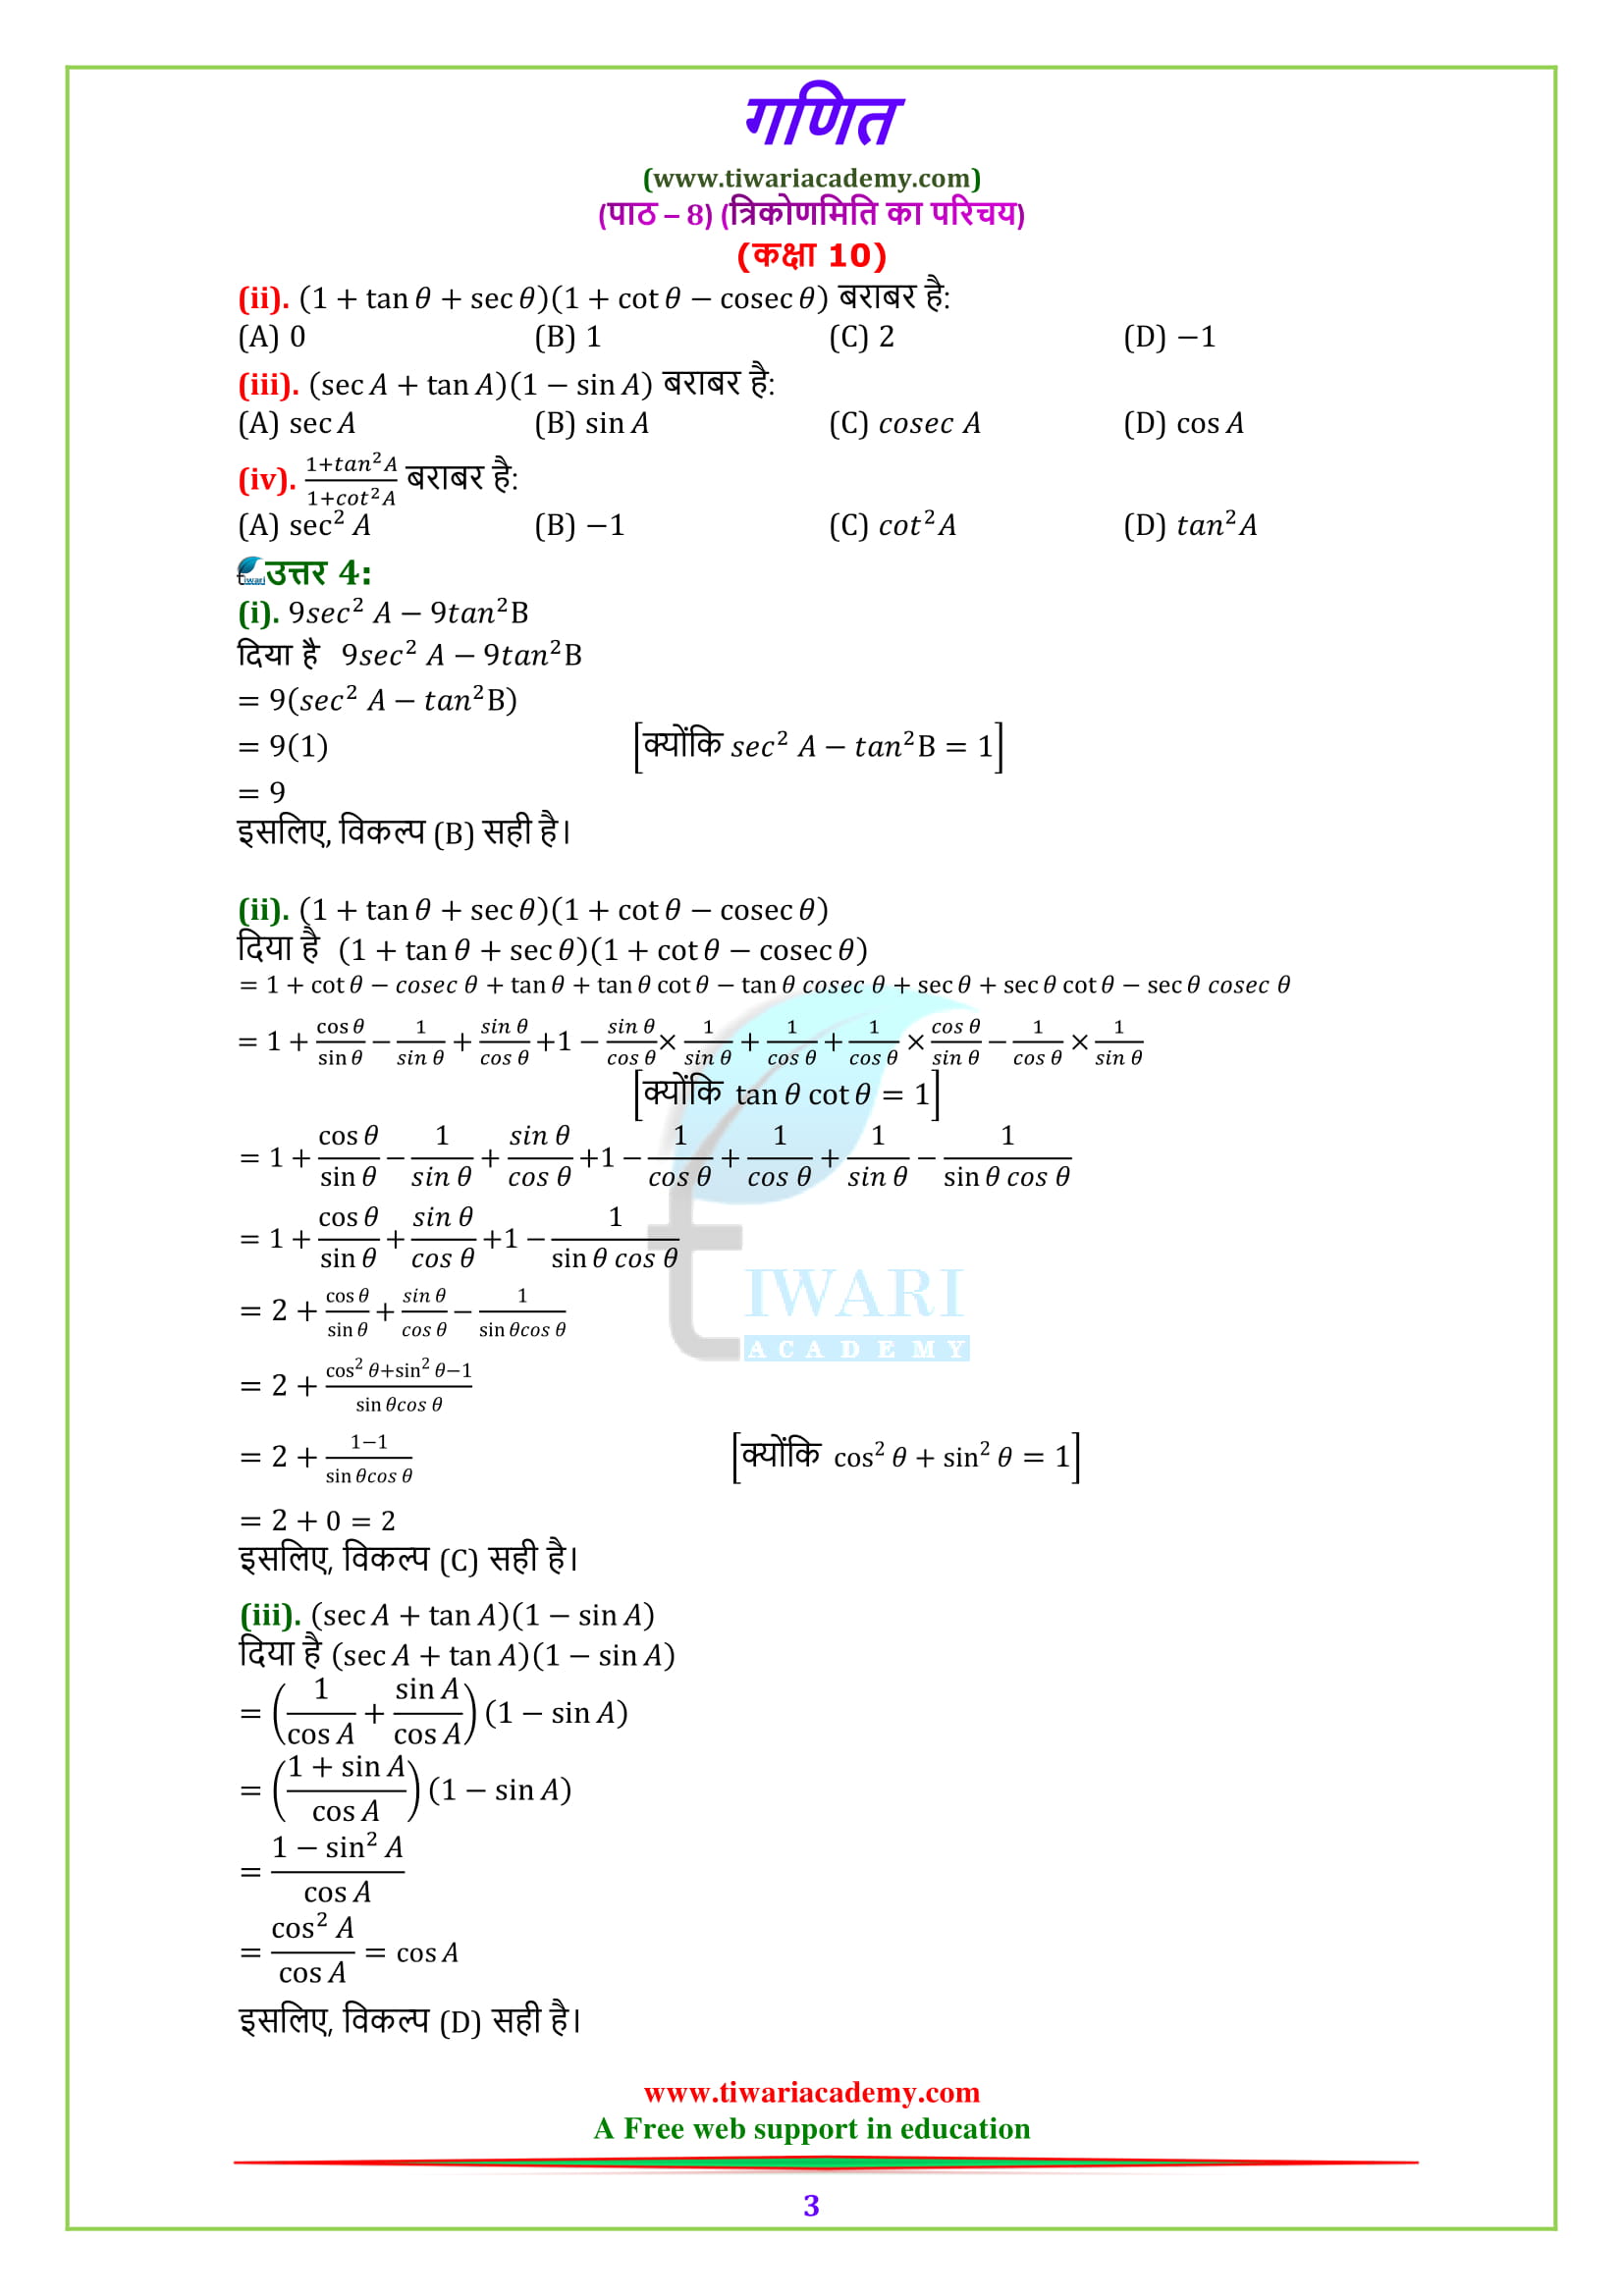 Class 10 Maths Chapter 8 Exercise 8.4 Question 3 & 4 Solutions